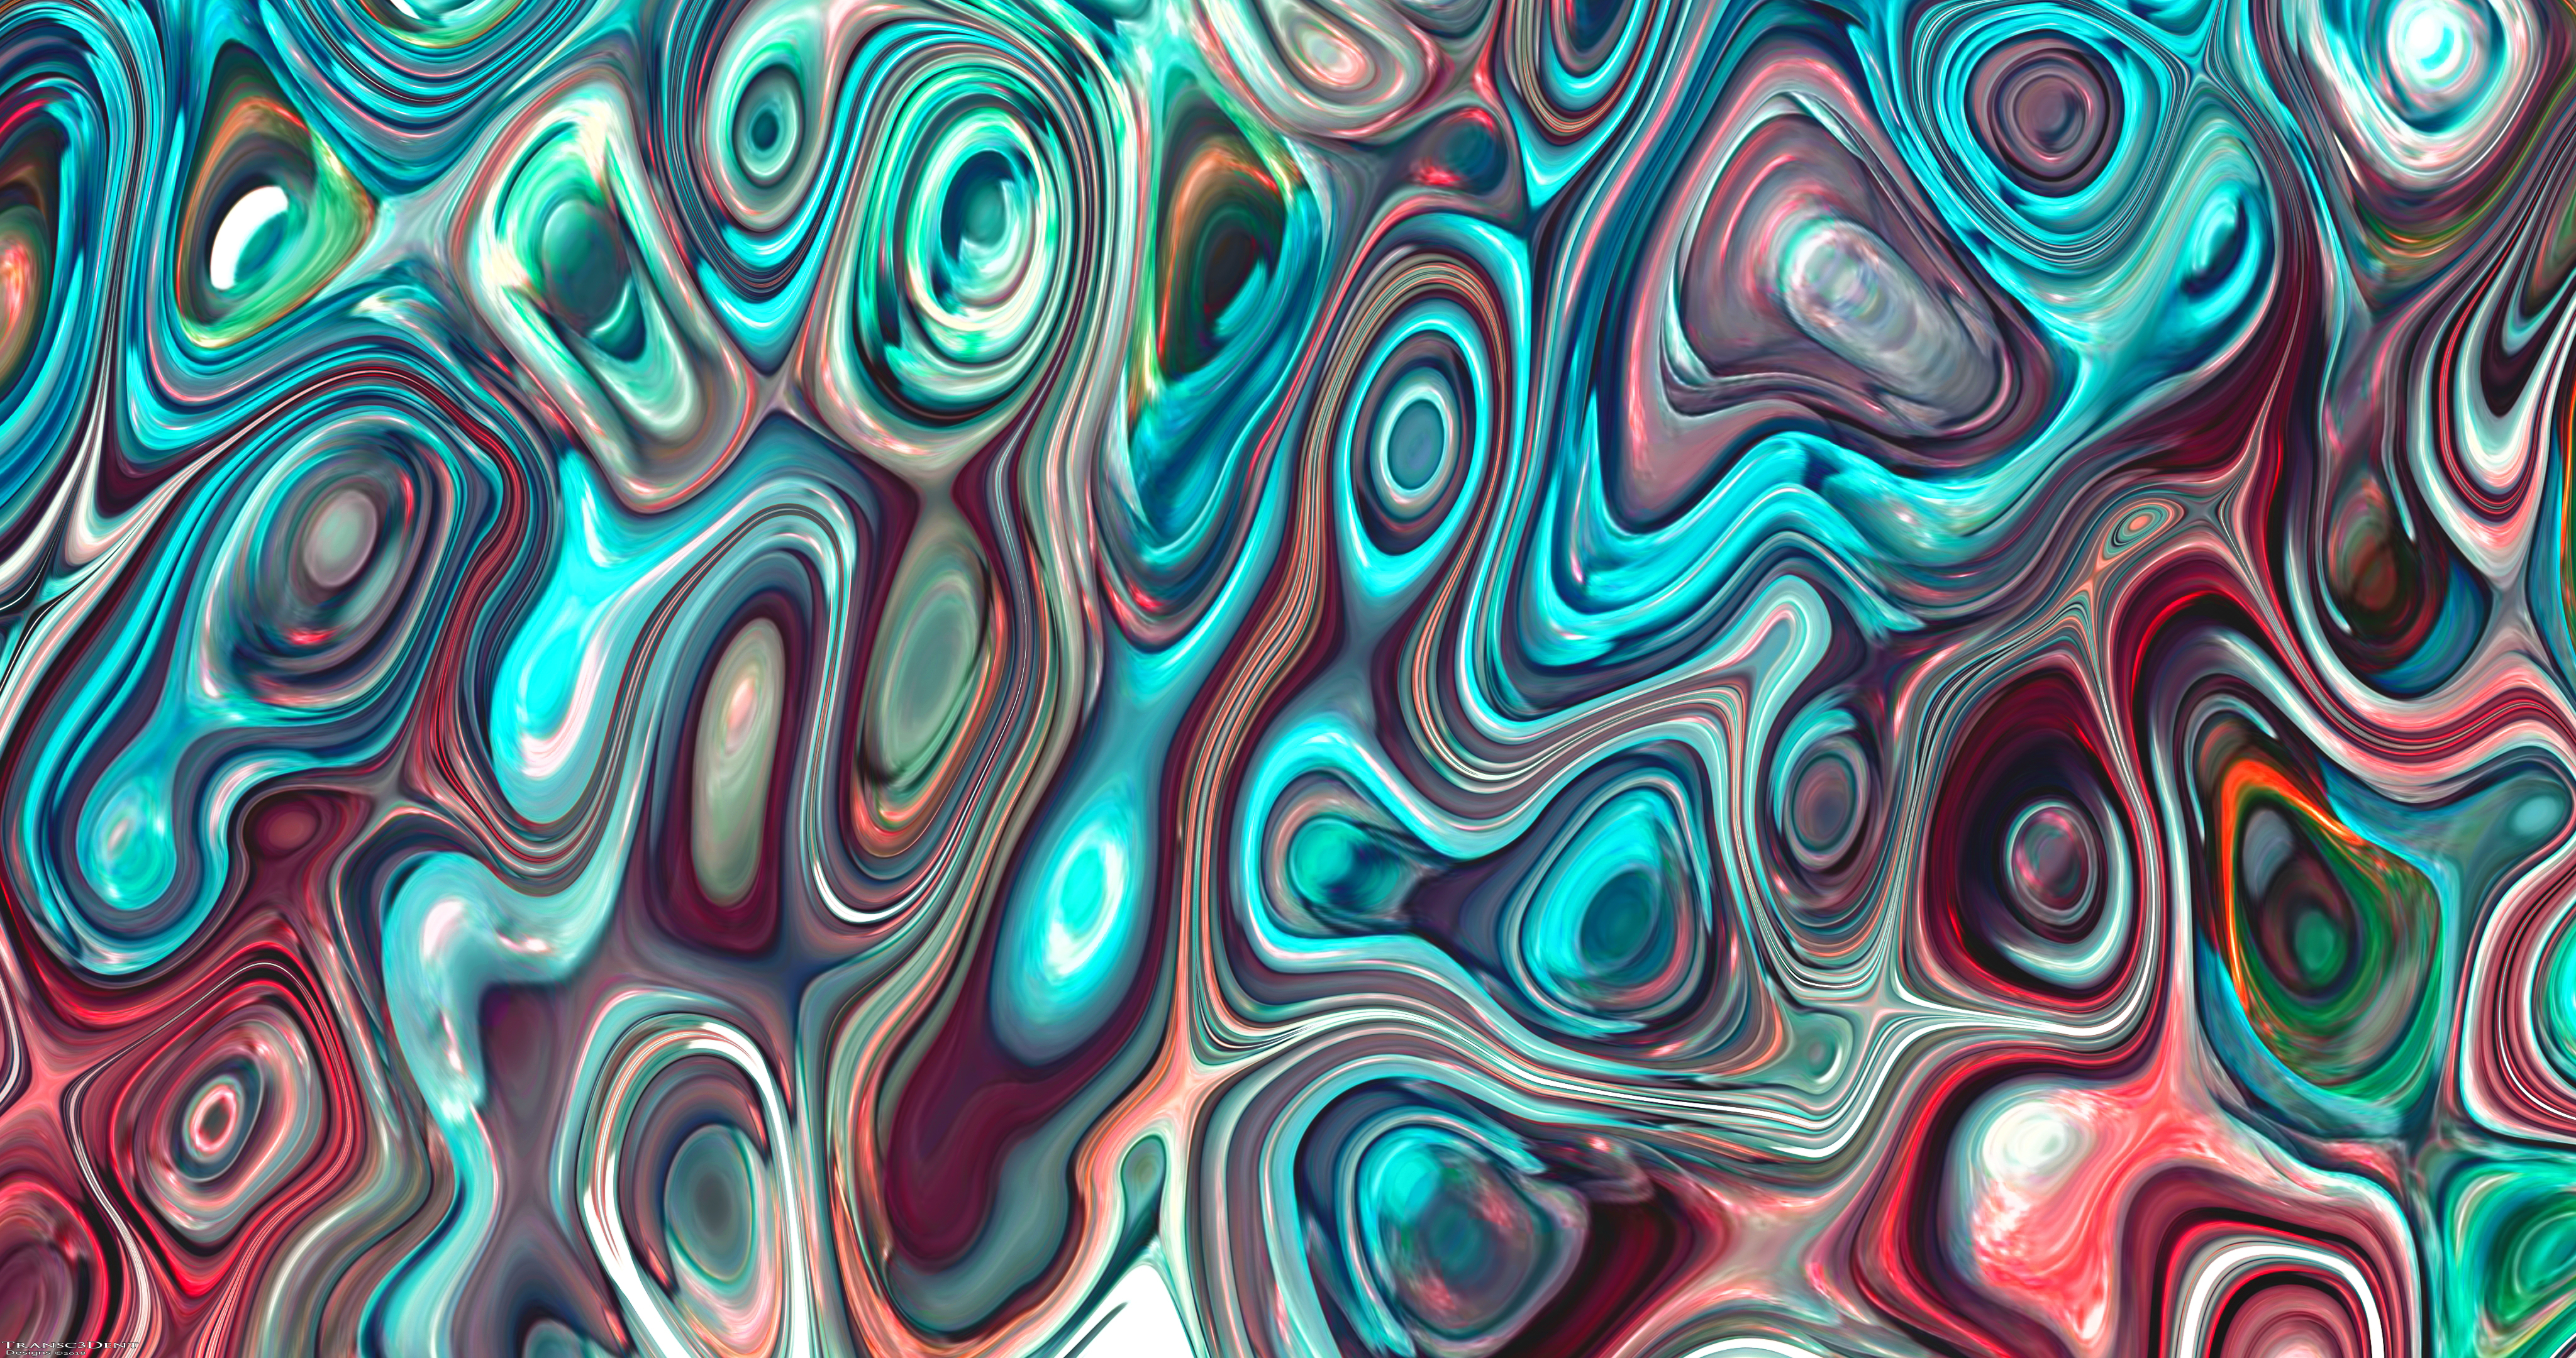 Windows Backgrounds divorces, abstract, ripples, ripple, motley, wavy, variegated